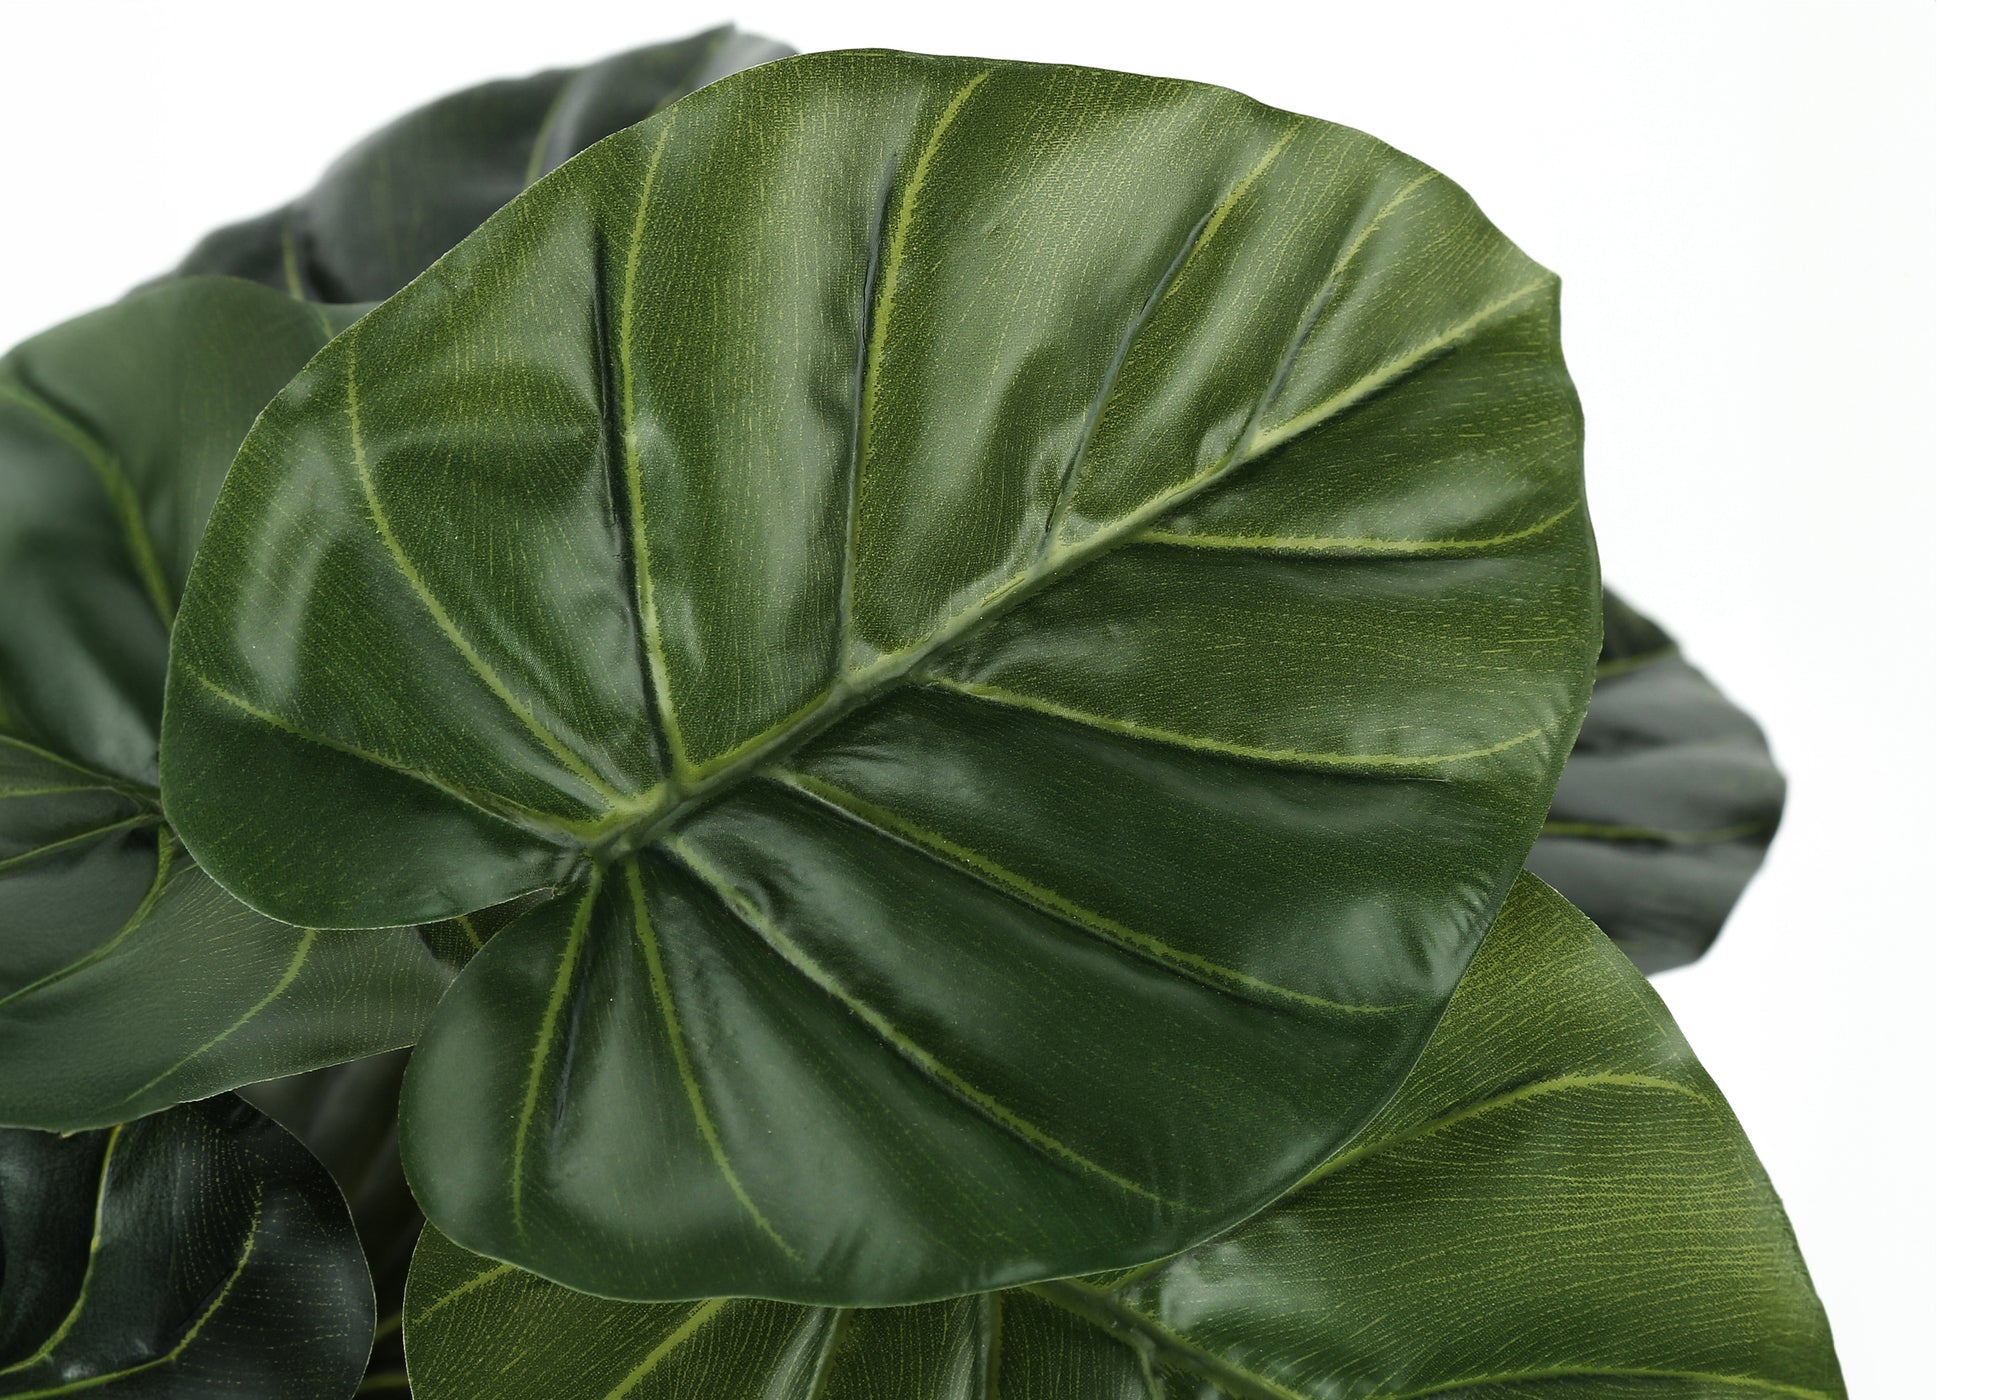 MN-699578    Artificial Plant, 24" Tall, Alocasia, Indoor, Faux, Fake, Table, Greenery, Potted, Real Touch, Decorative, Green Leaves, Black Pot